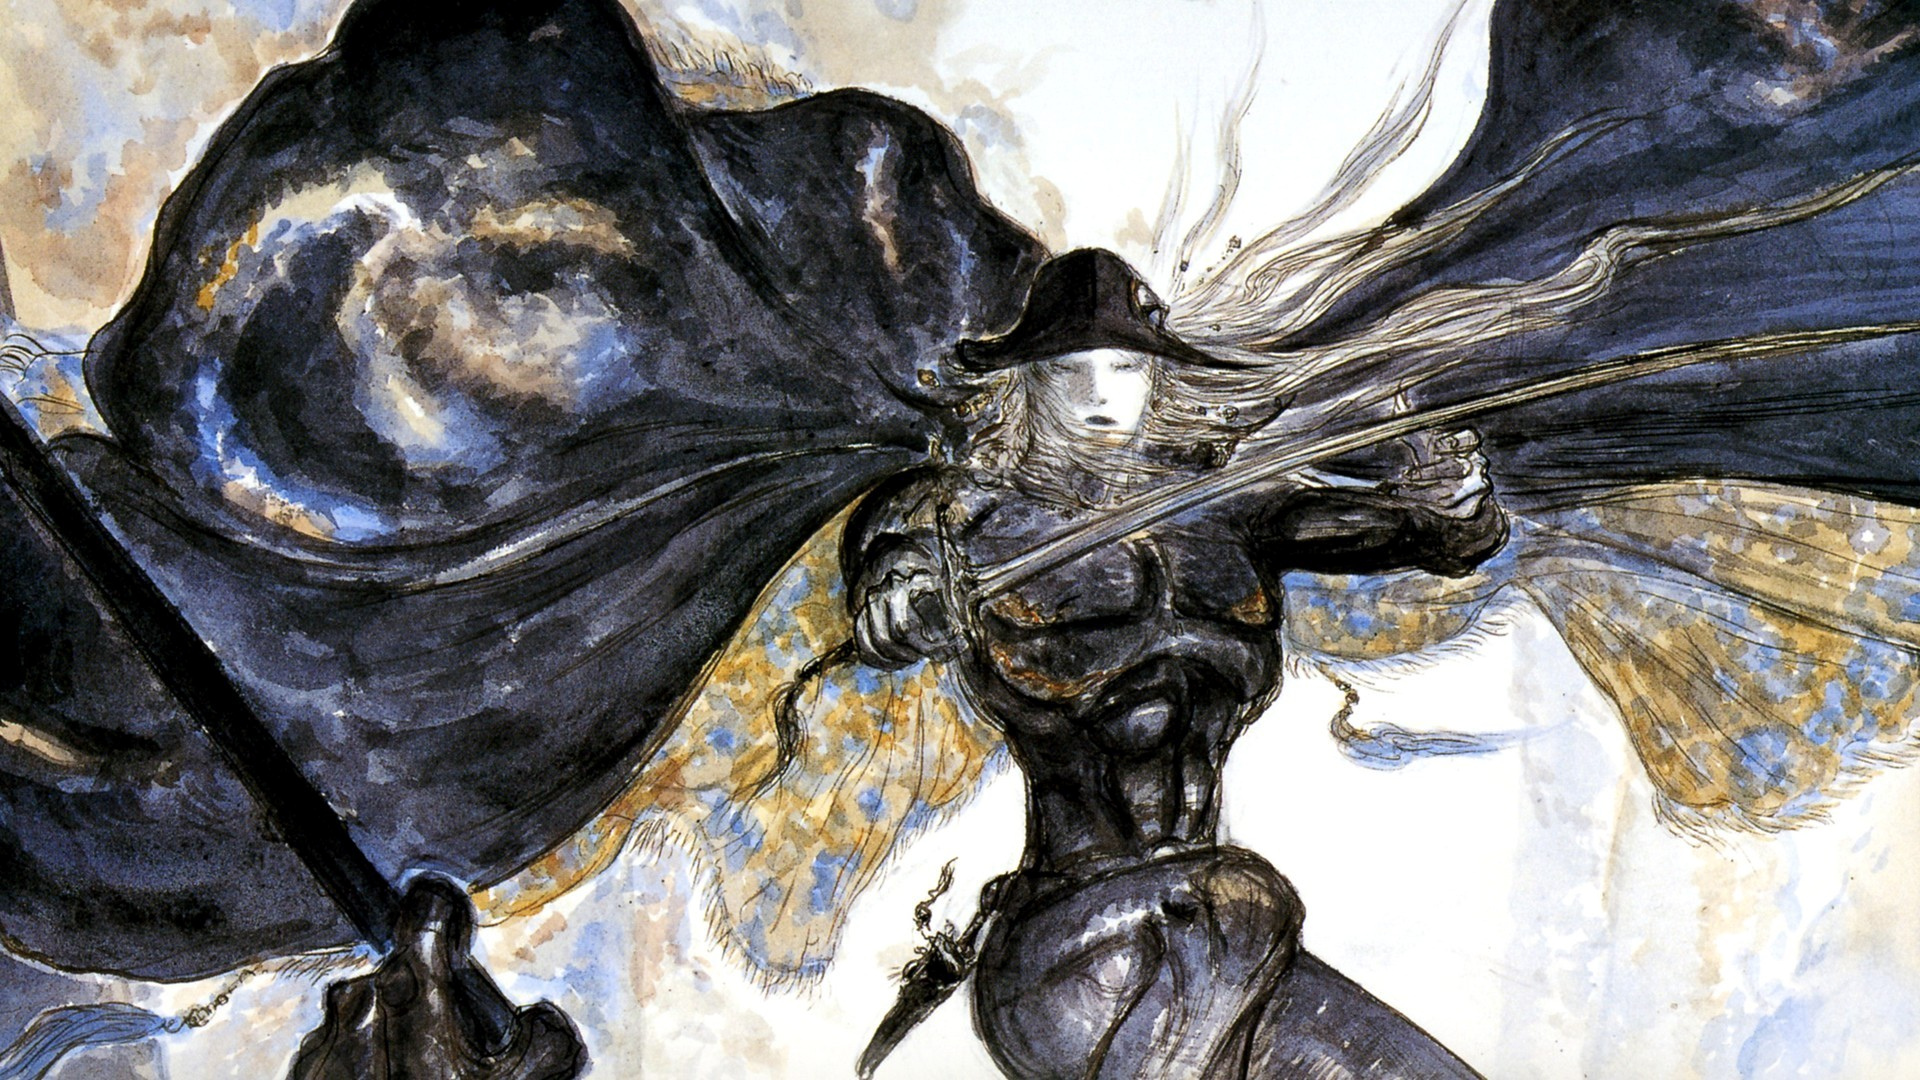 vampire hunter D review Archives - AAAPodcast